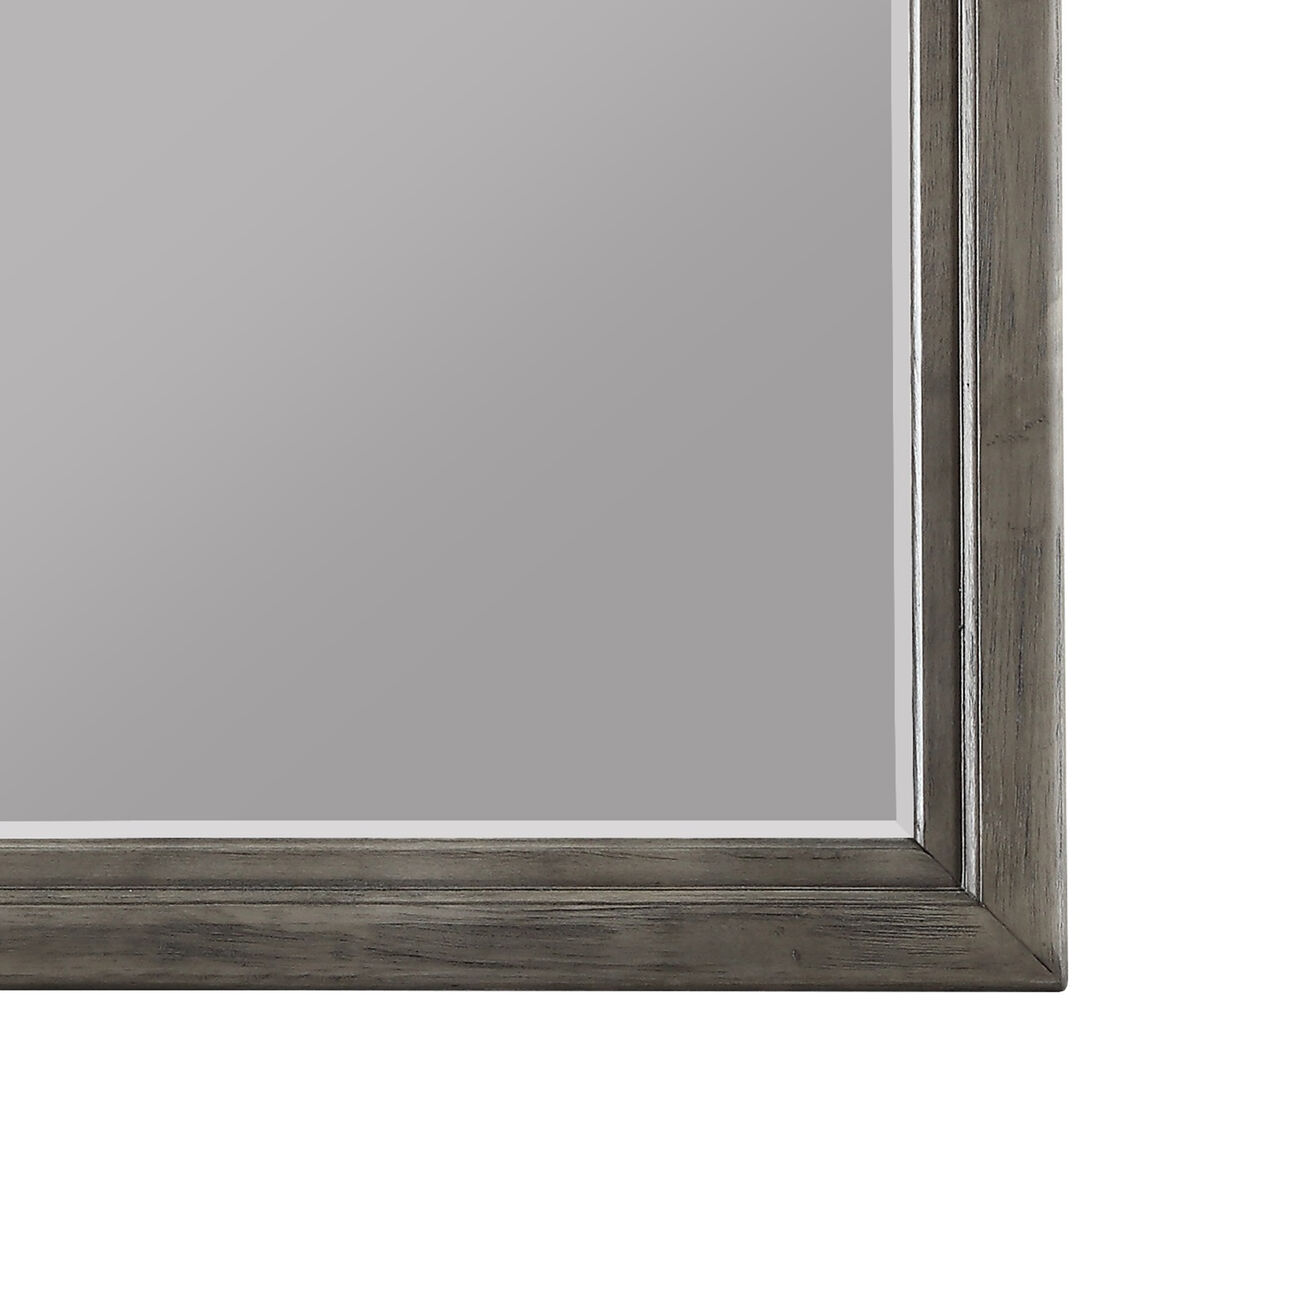 Transitional Style Wooden Decorative Mirror with Arched Top, Gray